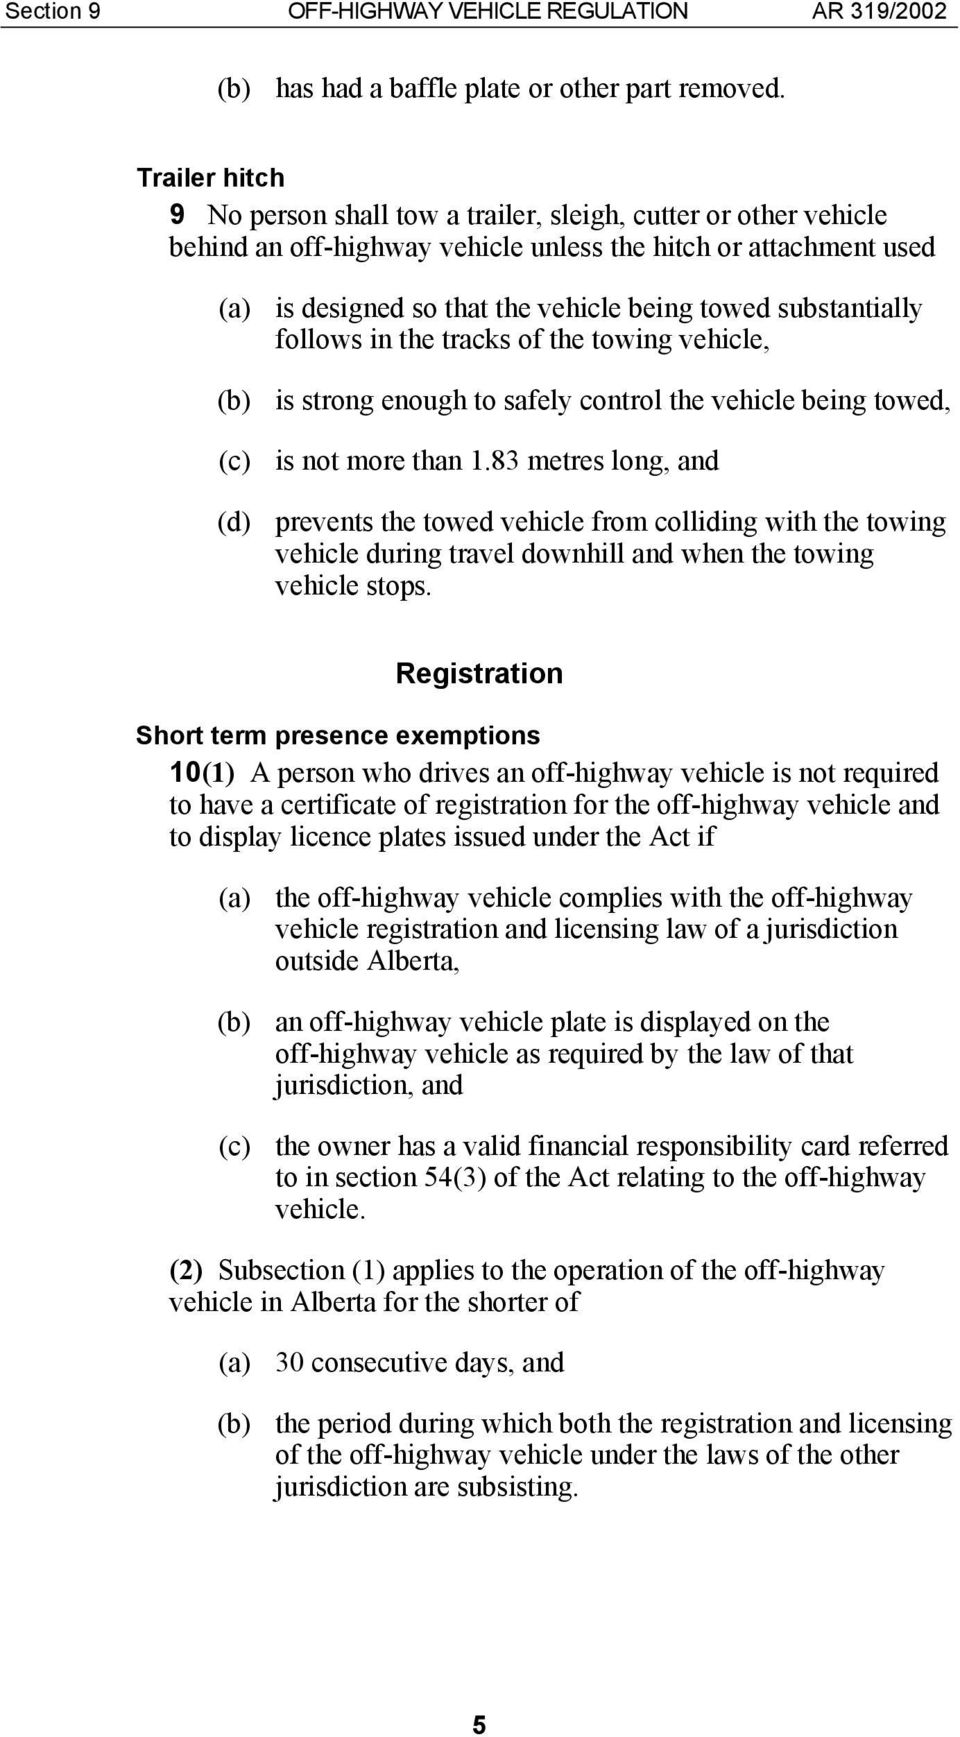 substantially follows in the tracks of the towing vehicle, (b) is strong enough to safely control the vehicle being towed, (c) is not more than 1.